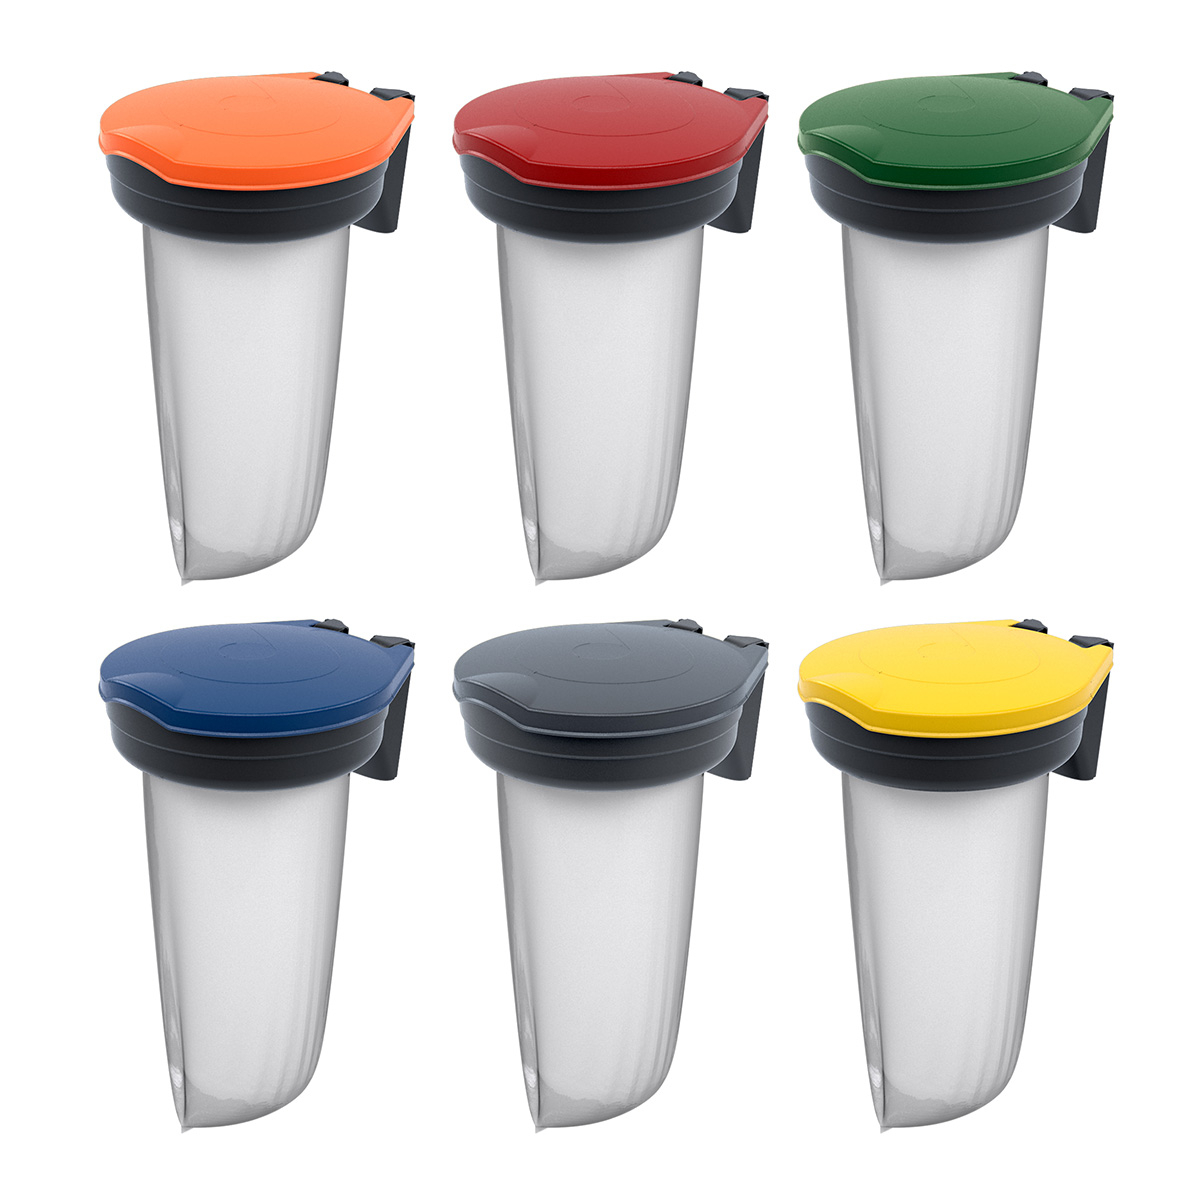 Skipper™ Barrier Recycling Bins Are Available in Six High-Visibility Colour